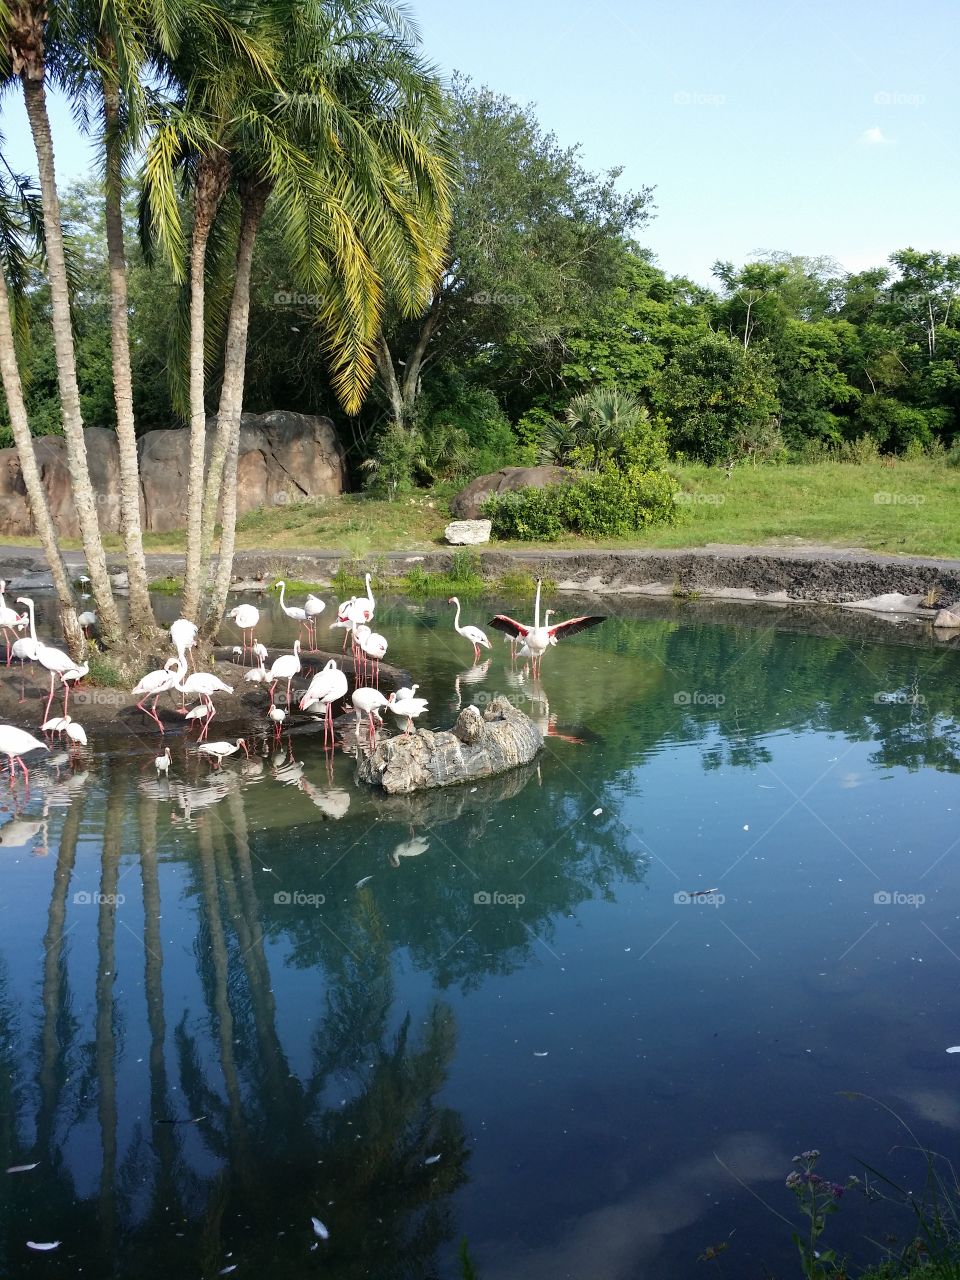 Flamingo Island. Took a picture of these lovely flamingos. 